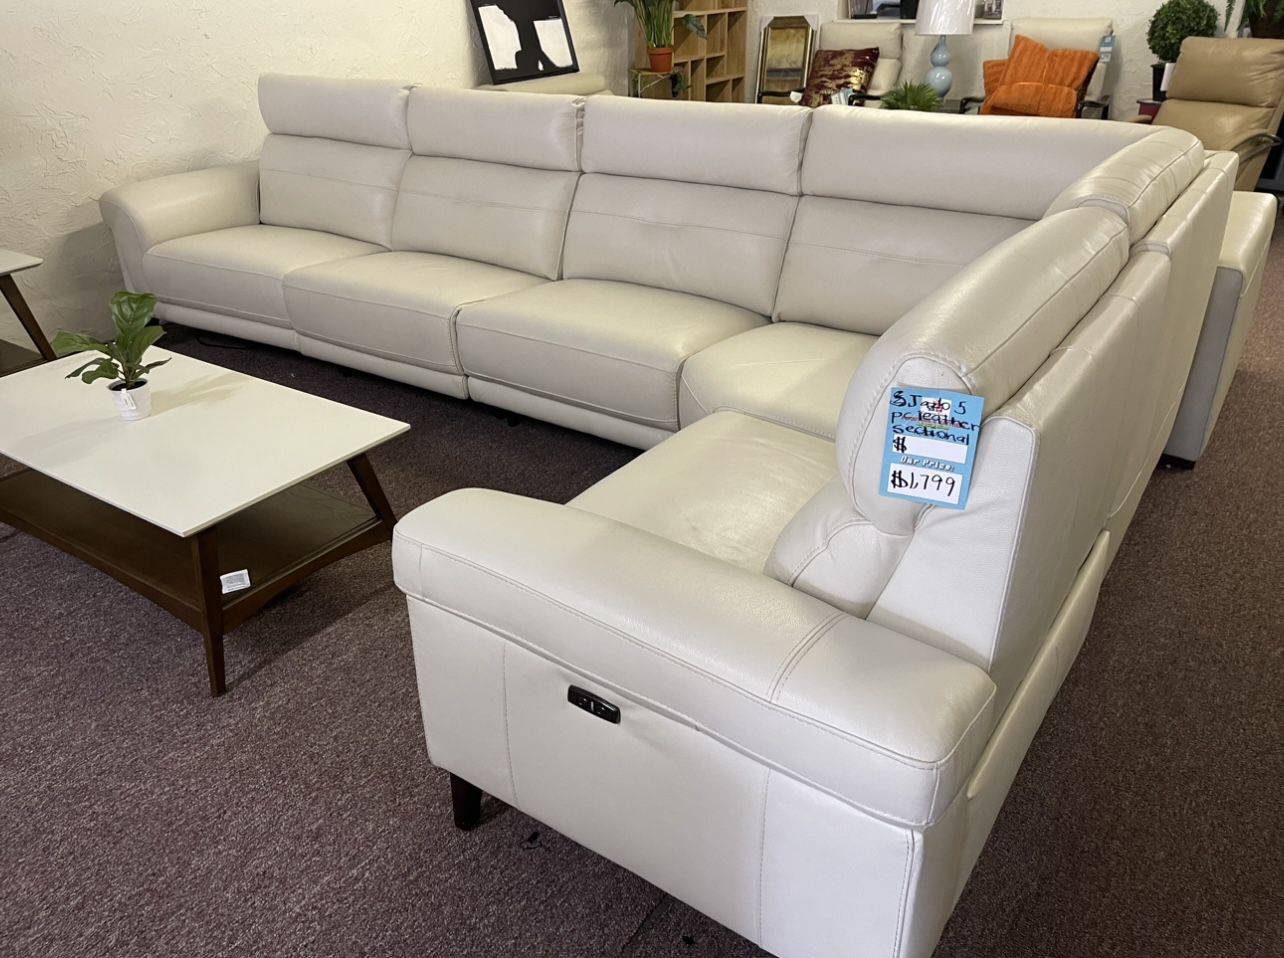 SALE- 100% Real Leather Sectional With 3 Power Recliners- Jazlo